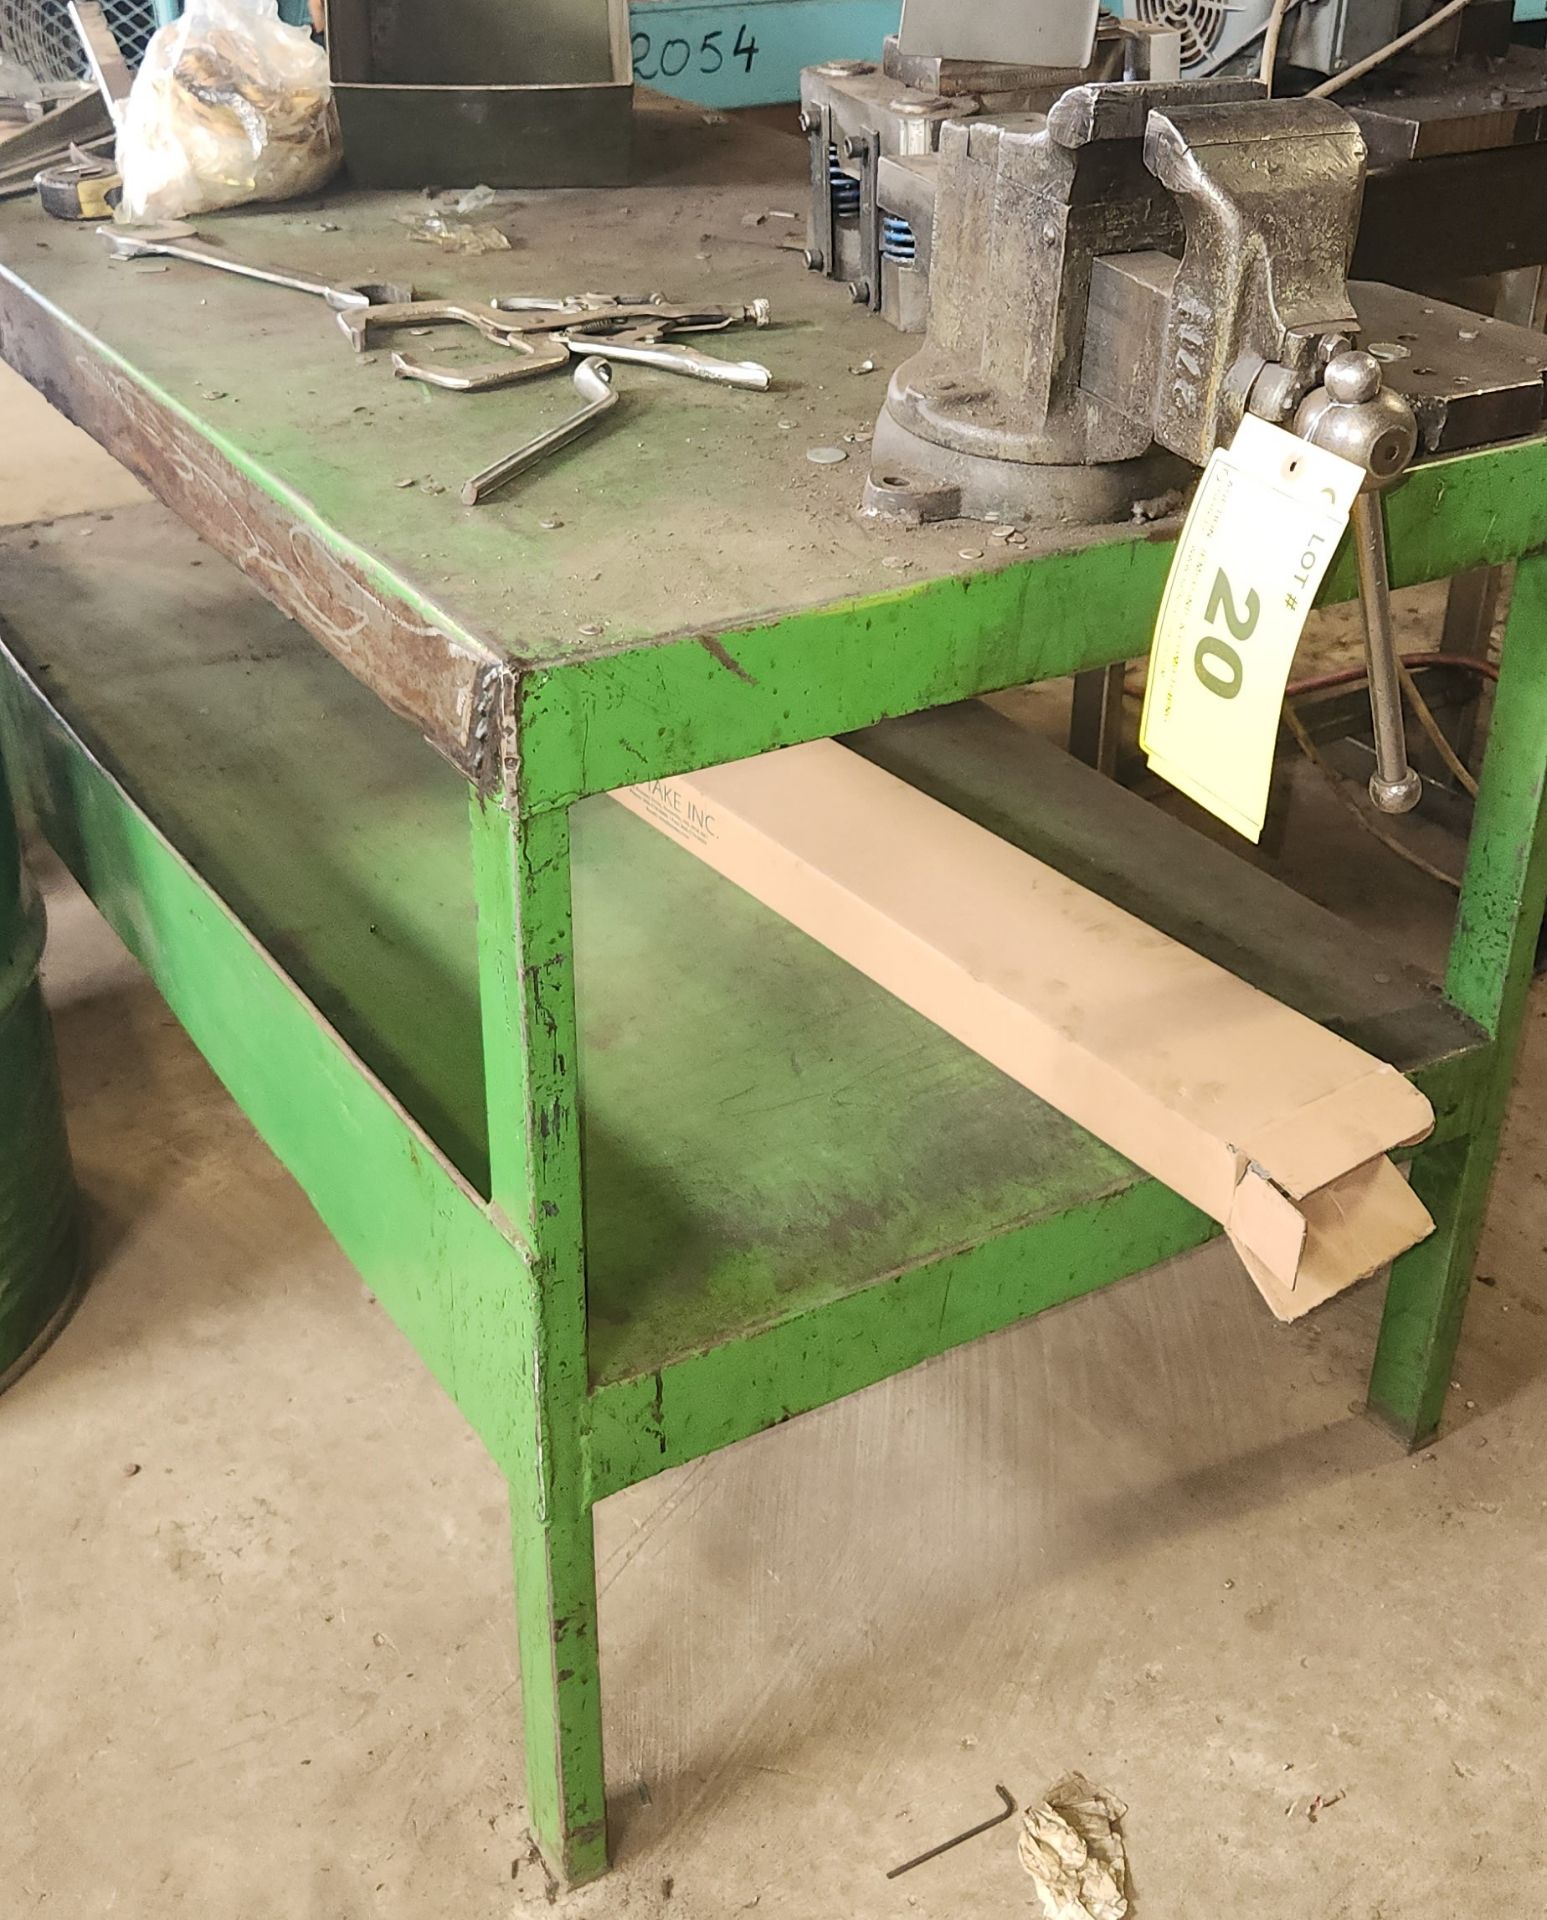 61" X 30" X 32"H WEDLING TABLE W/ VISE